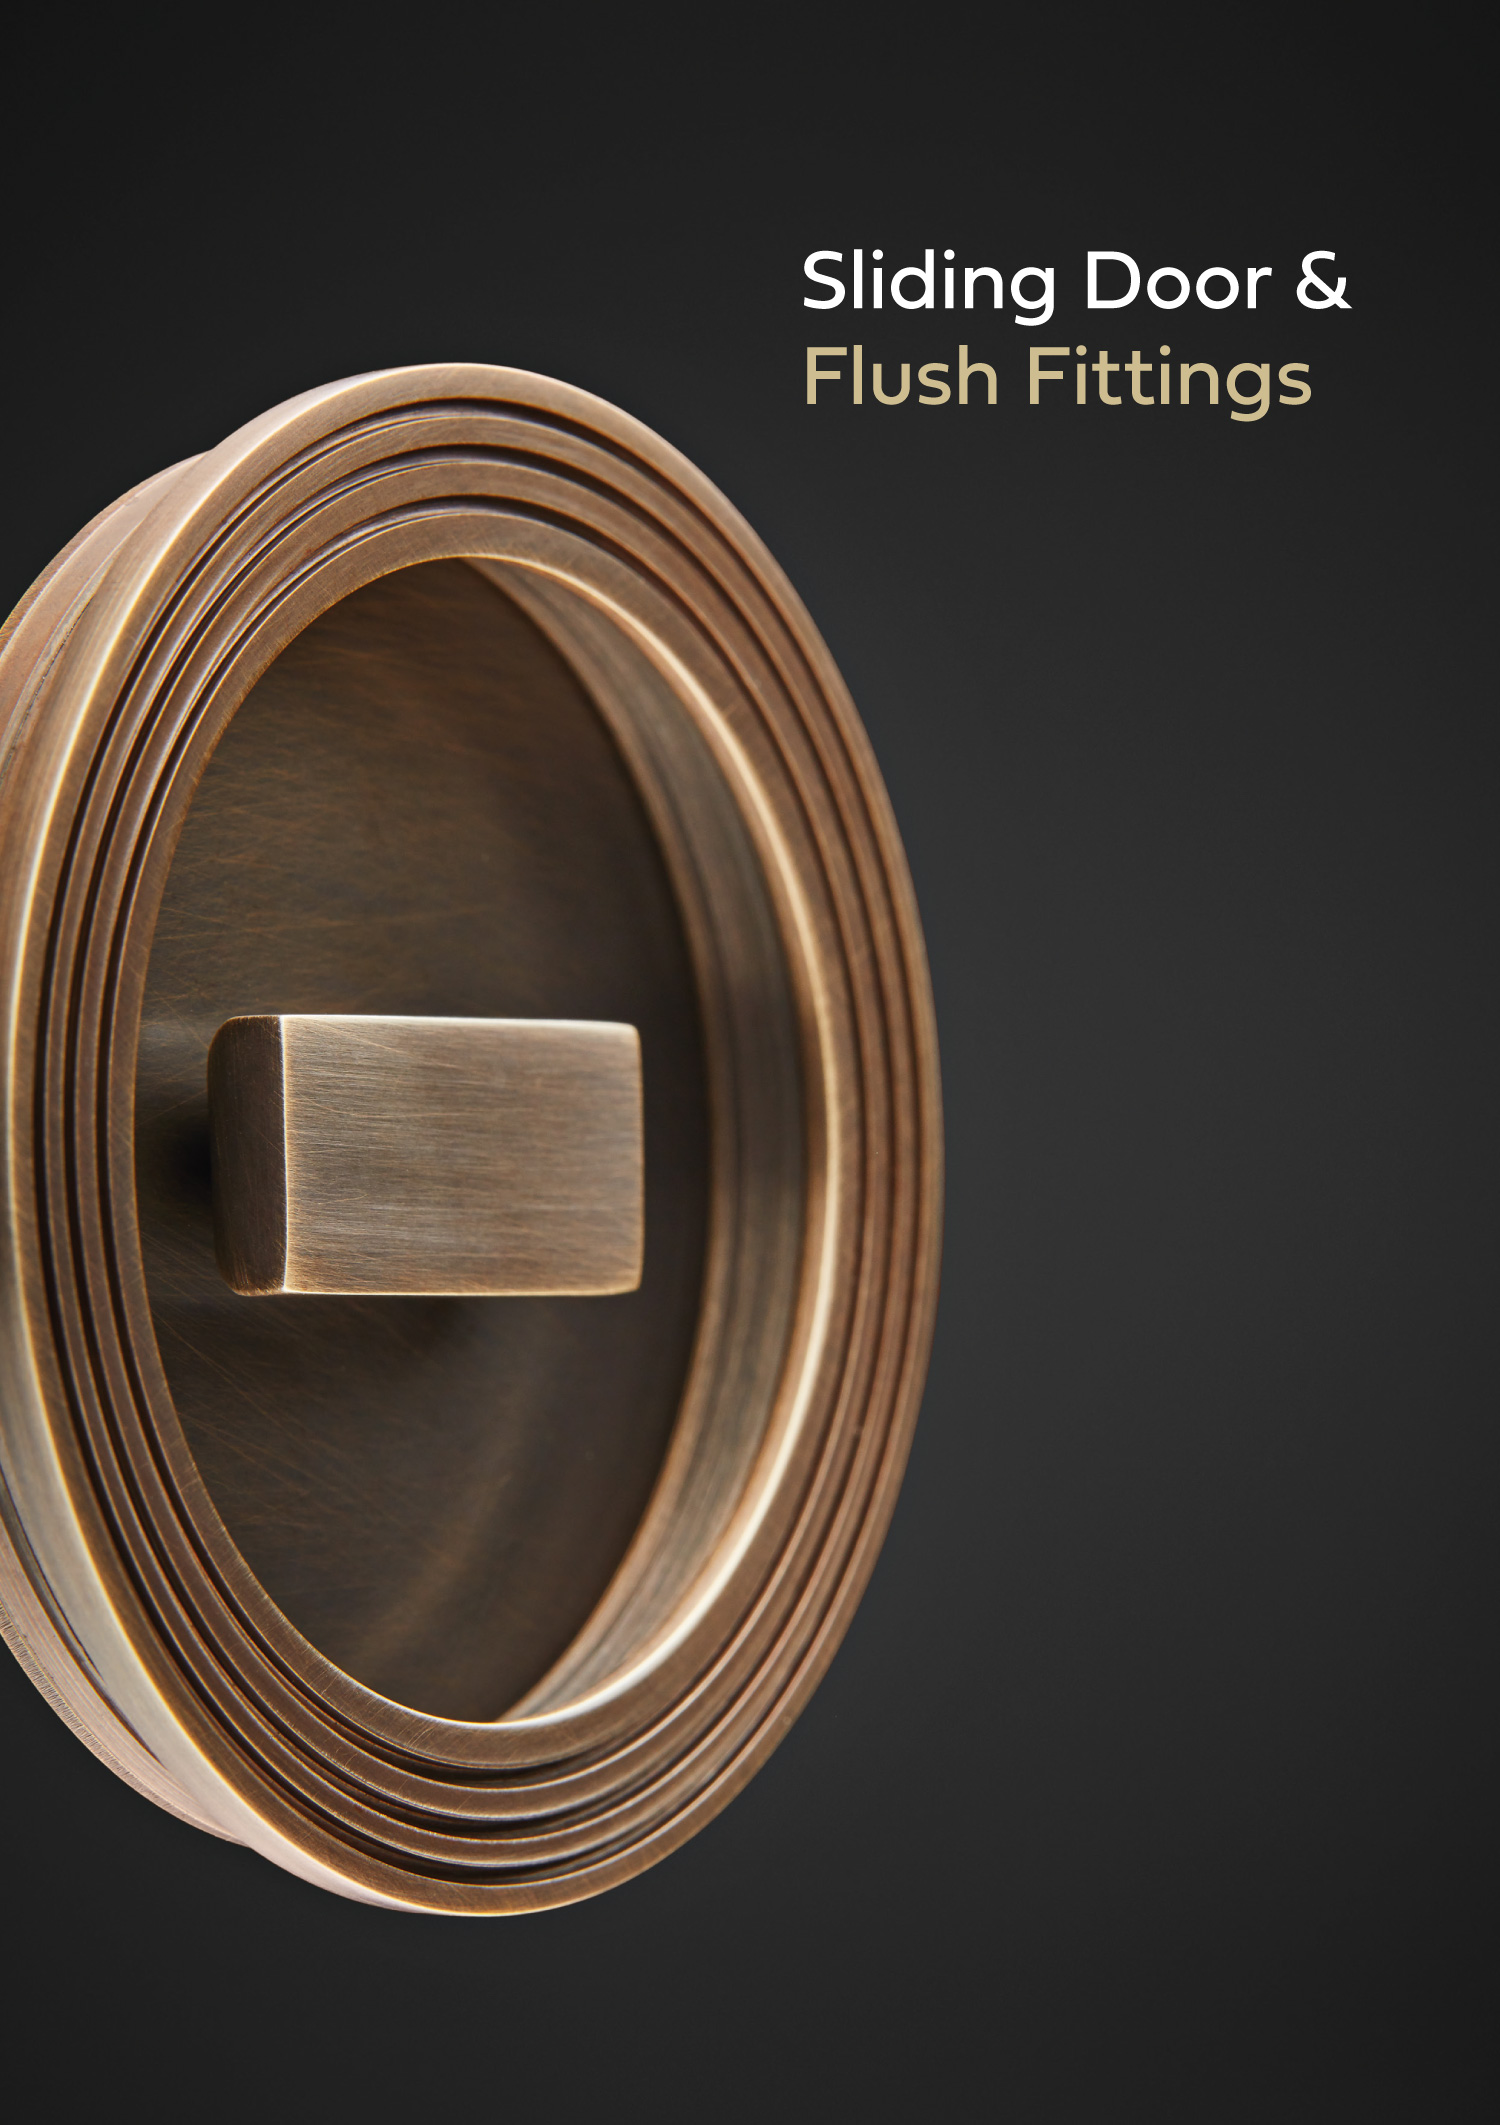 Sliding door and flush fittings brochure by Croft